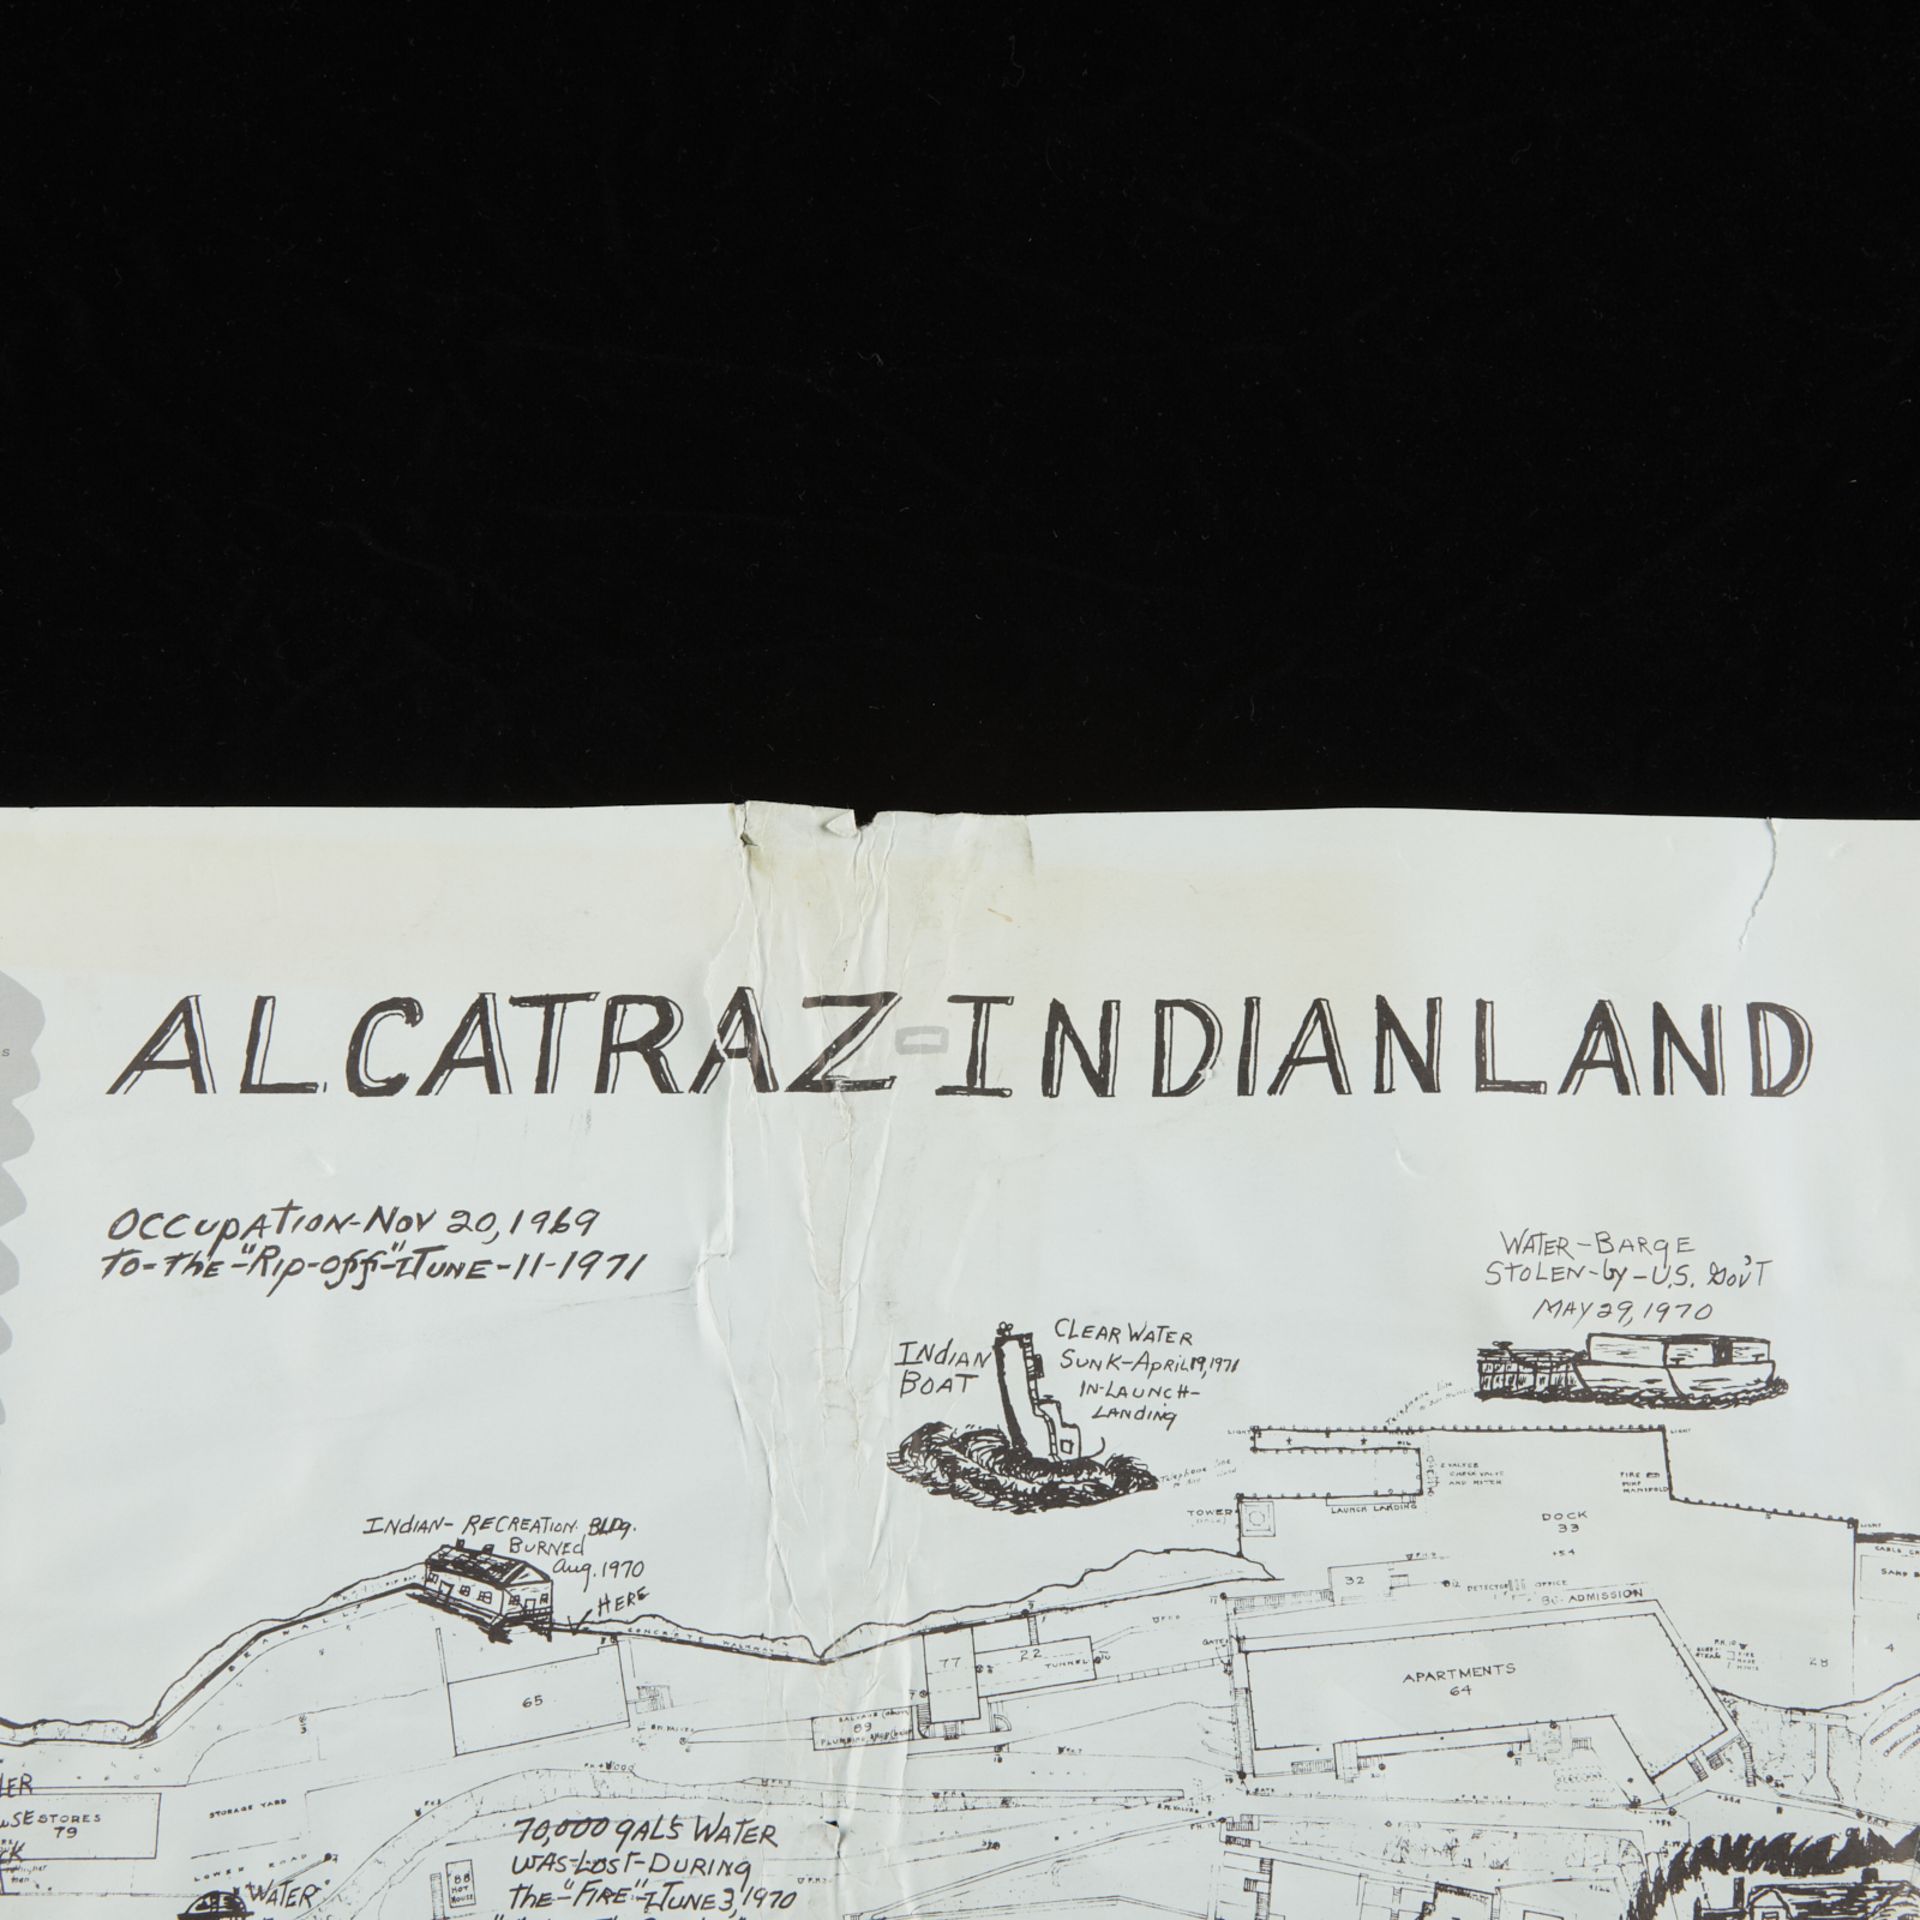 "Alcatraz - Indian Land" Occupation Protest Flyer - Image 4 of 8